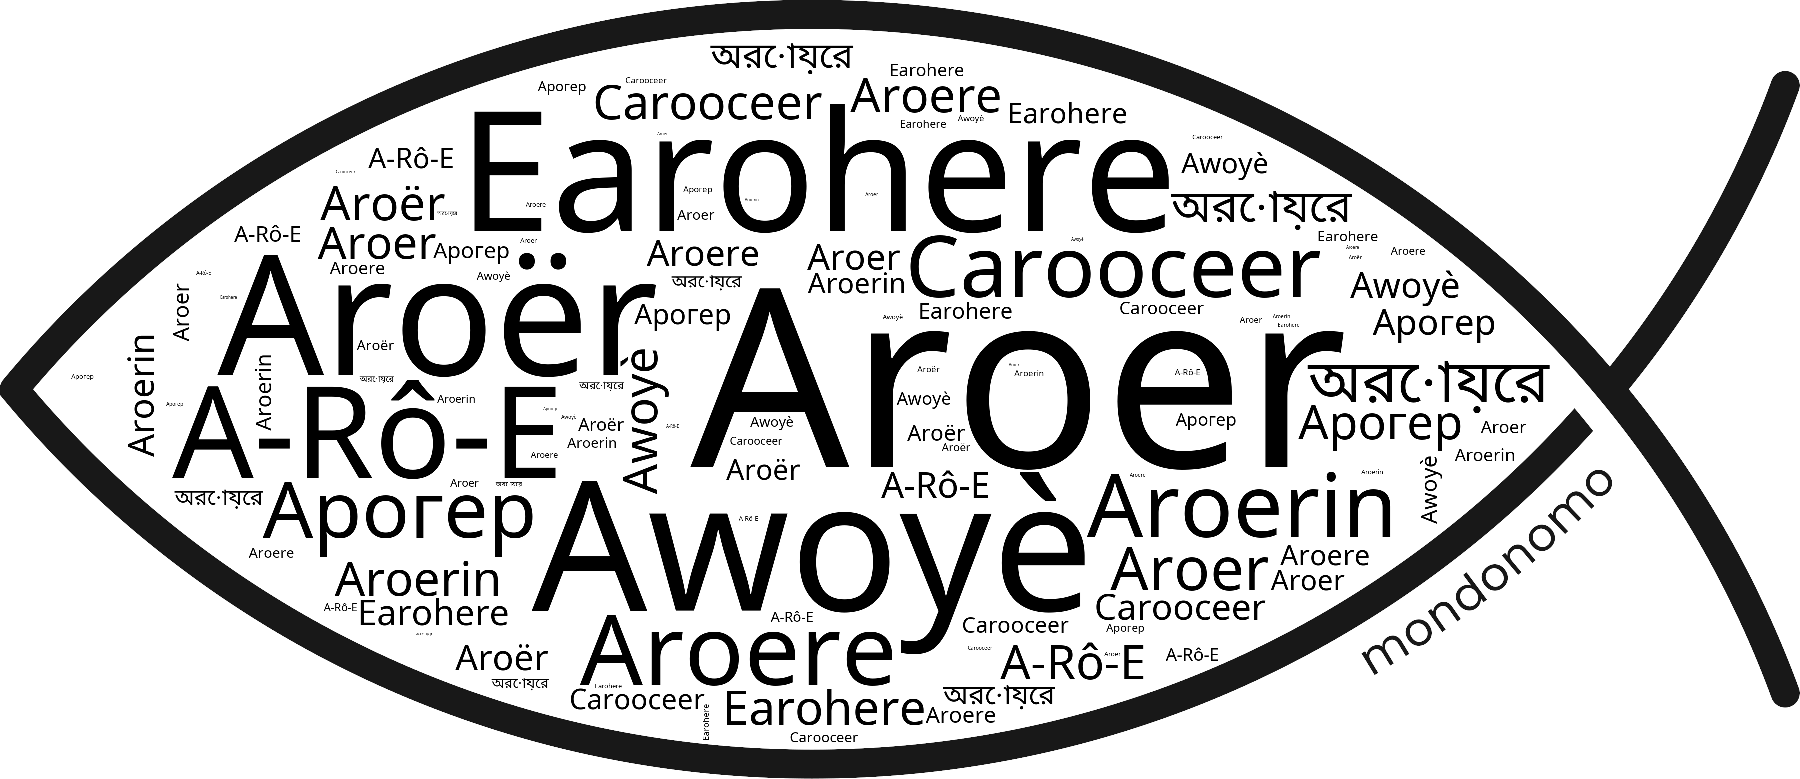 Name Aroer in the world's Bibles